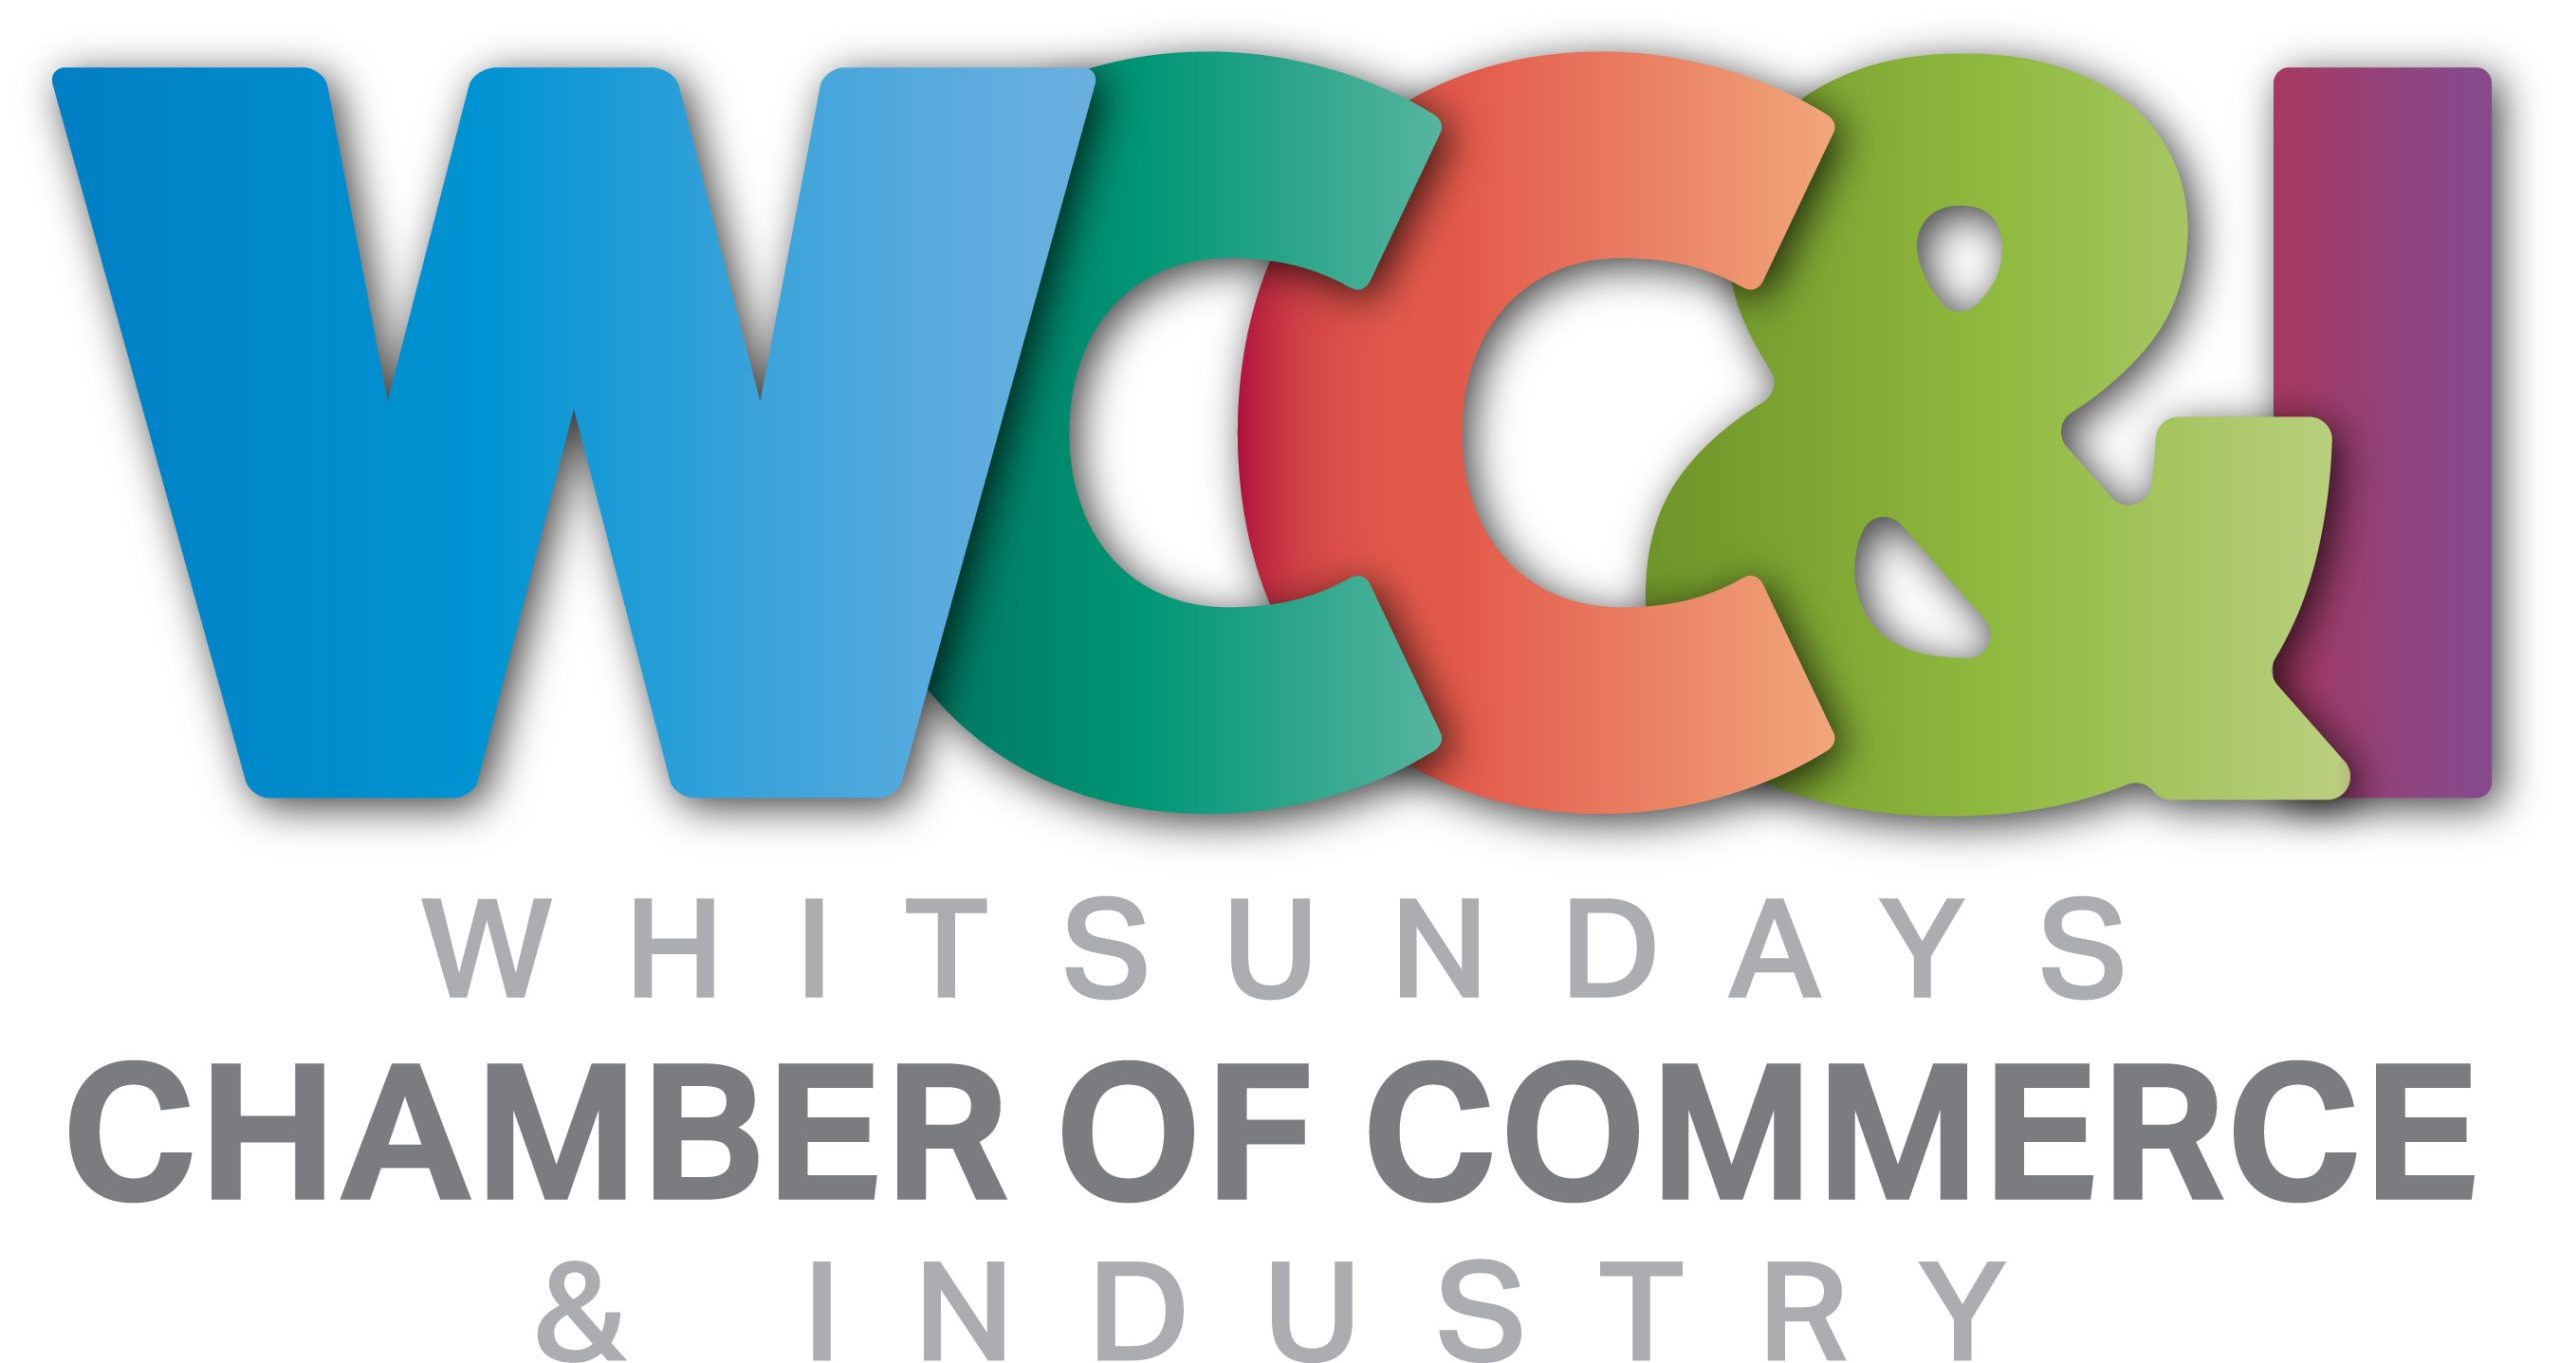 Whitsundays Chamber of Commerce and Industry